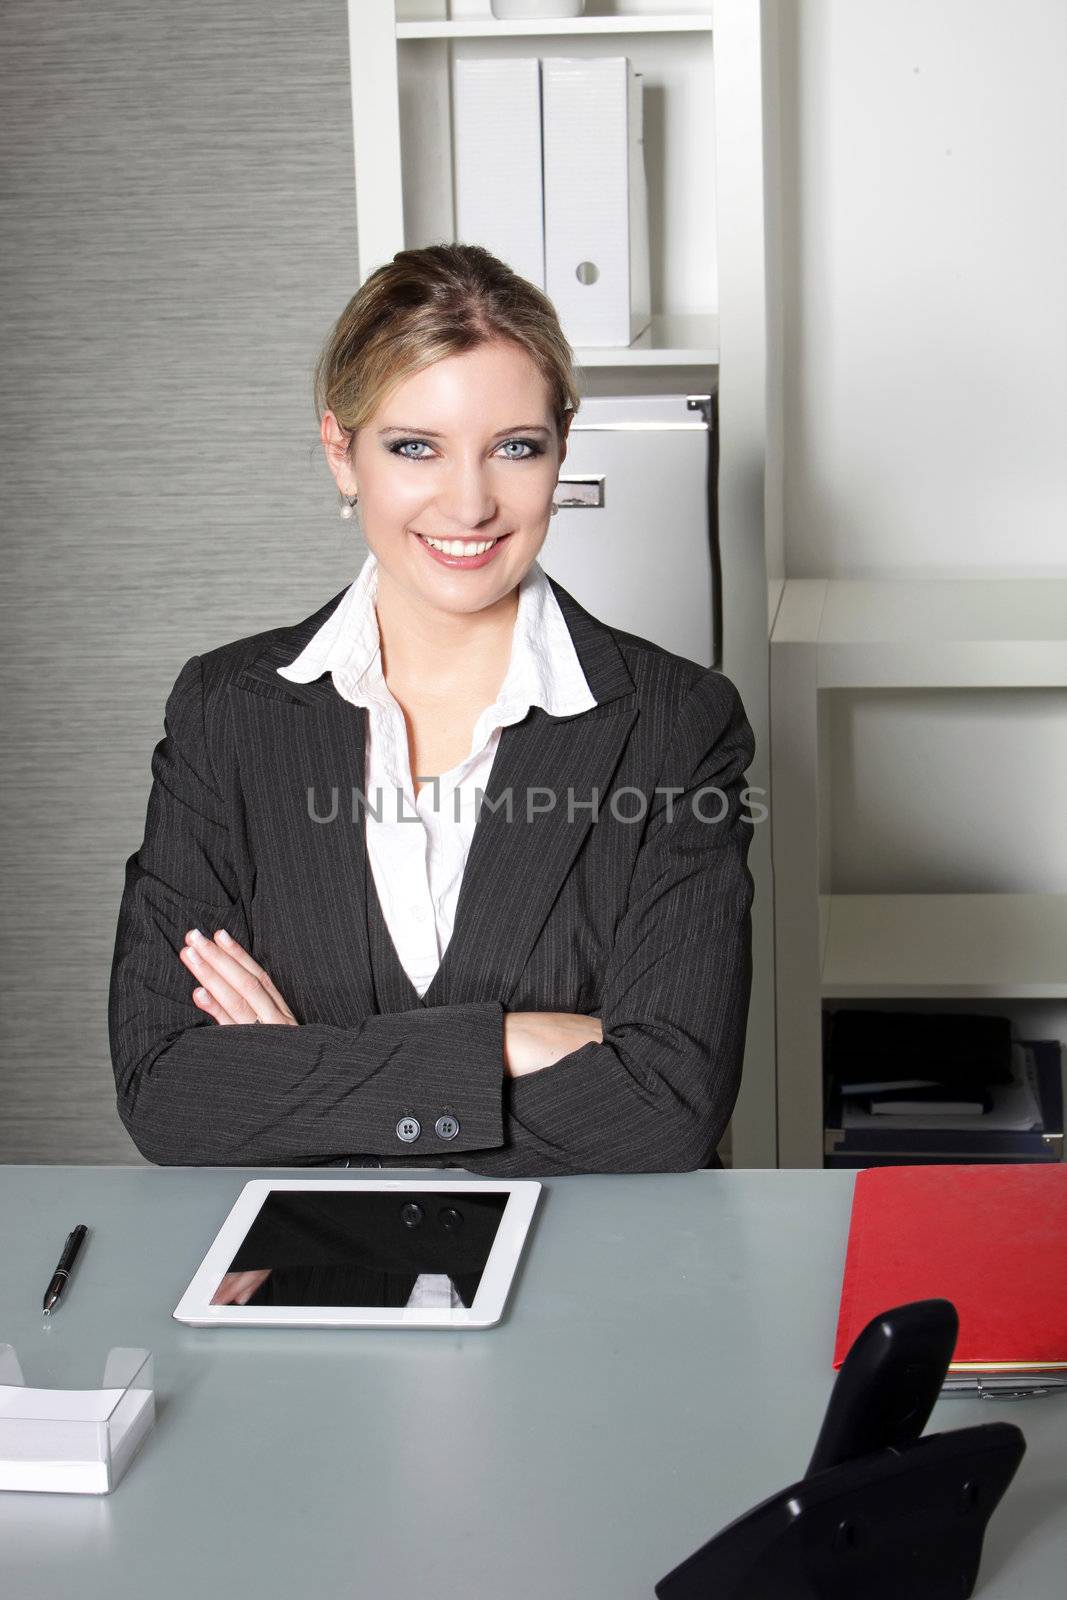 Confident successful businesswoman sitting at her desk with her arms folded smiling at the camera